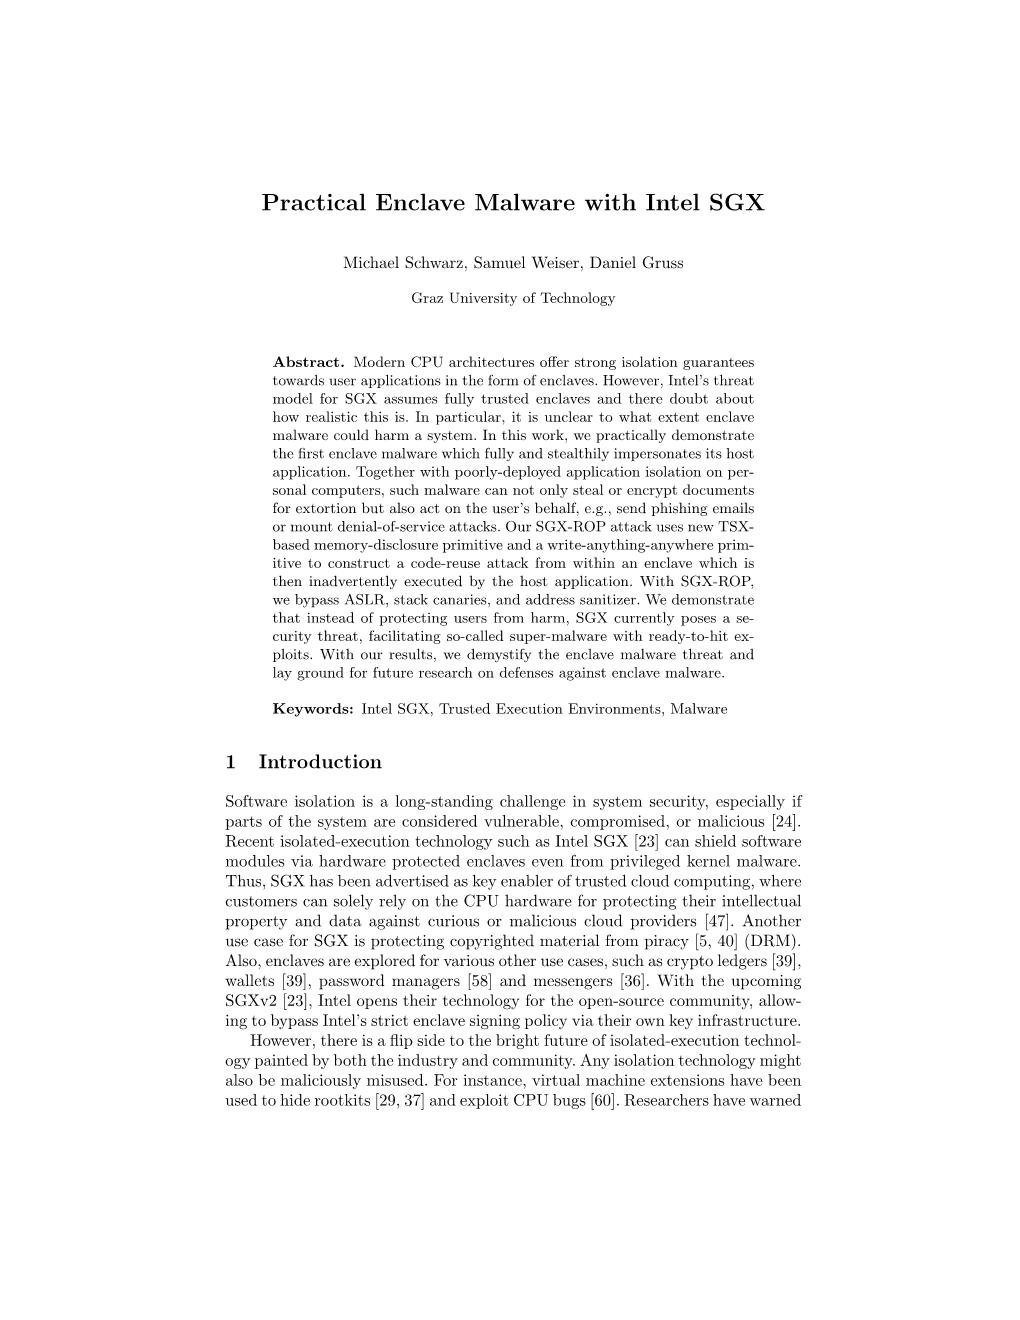 Practical Enclave Malware with Intel SGX